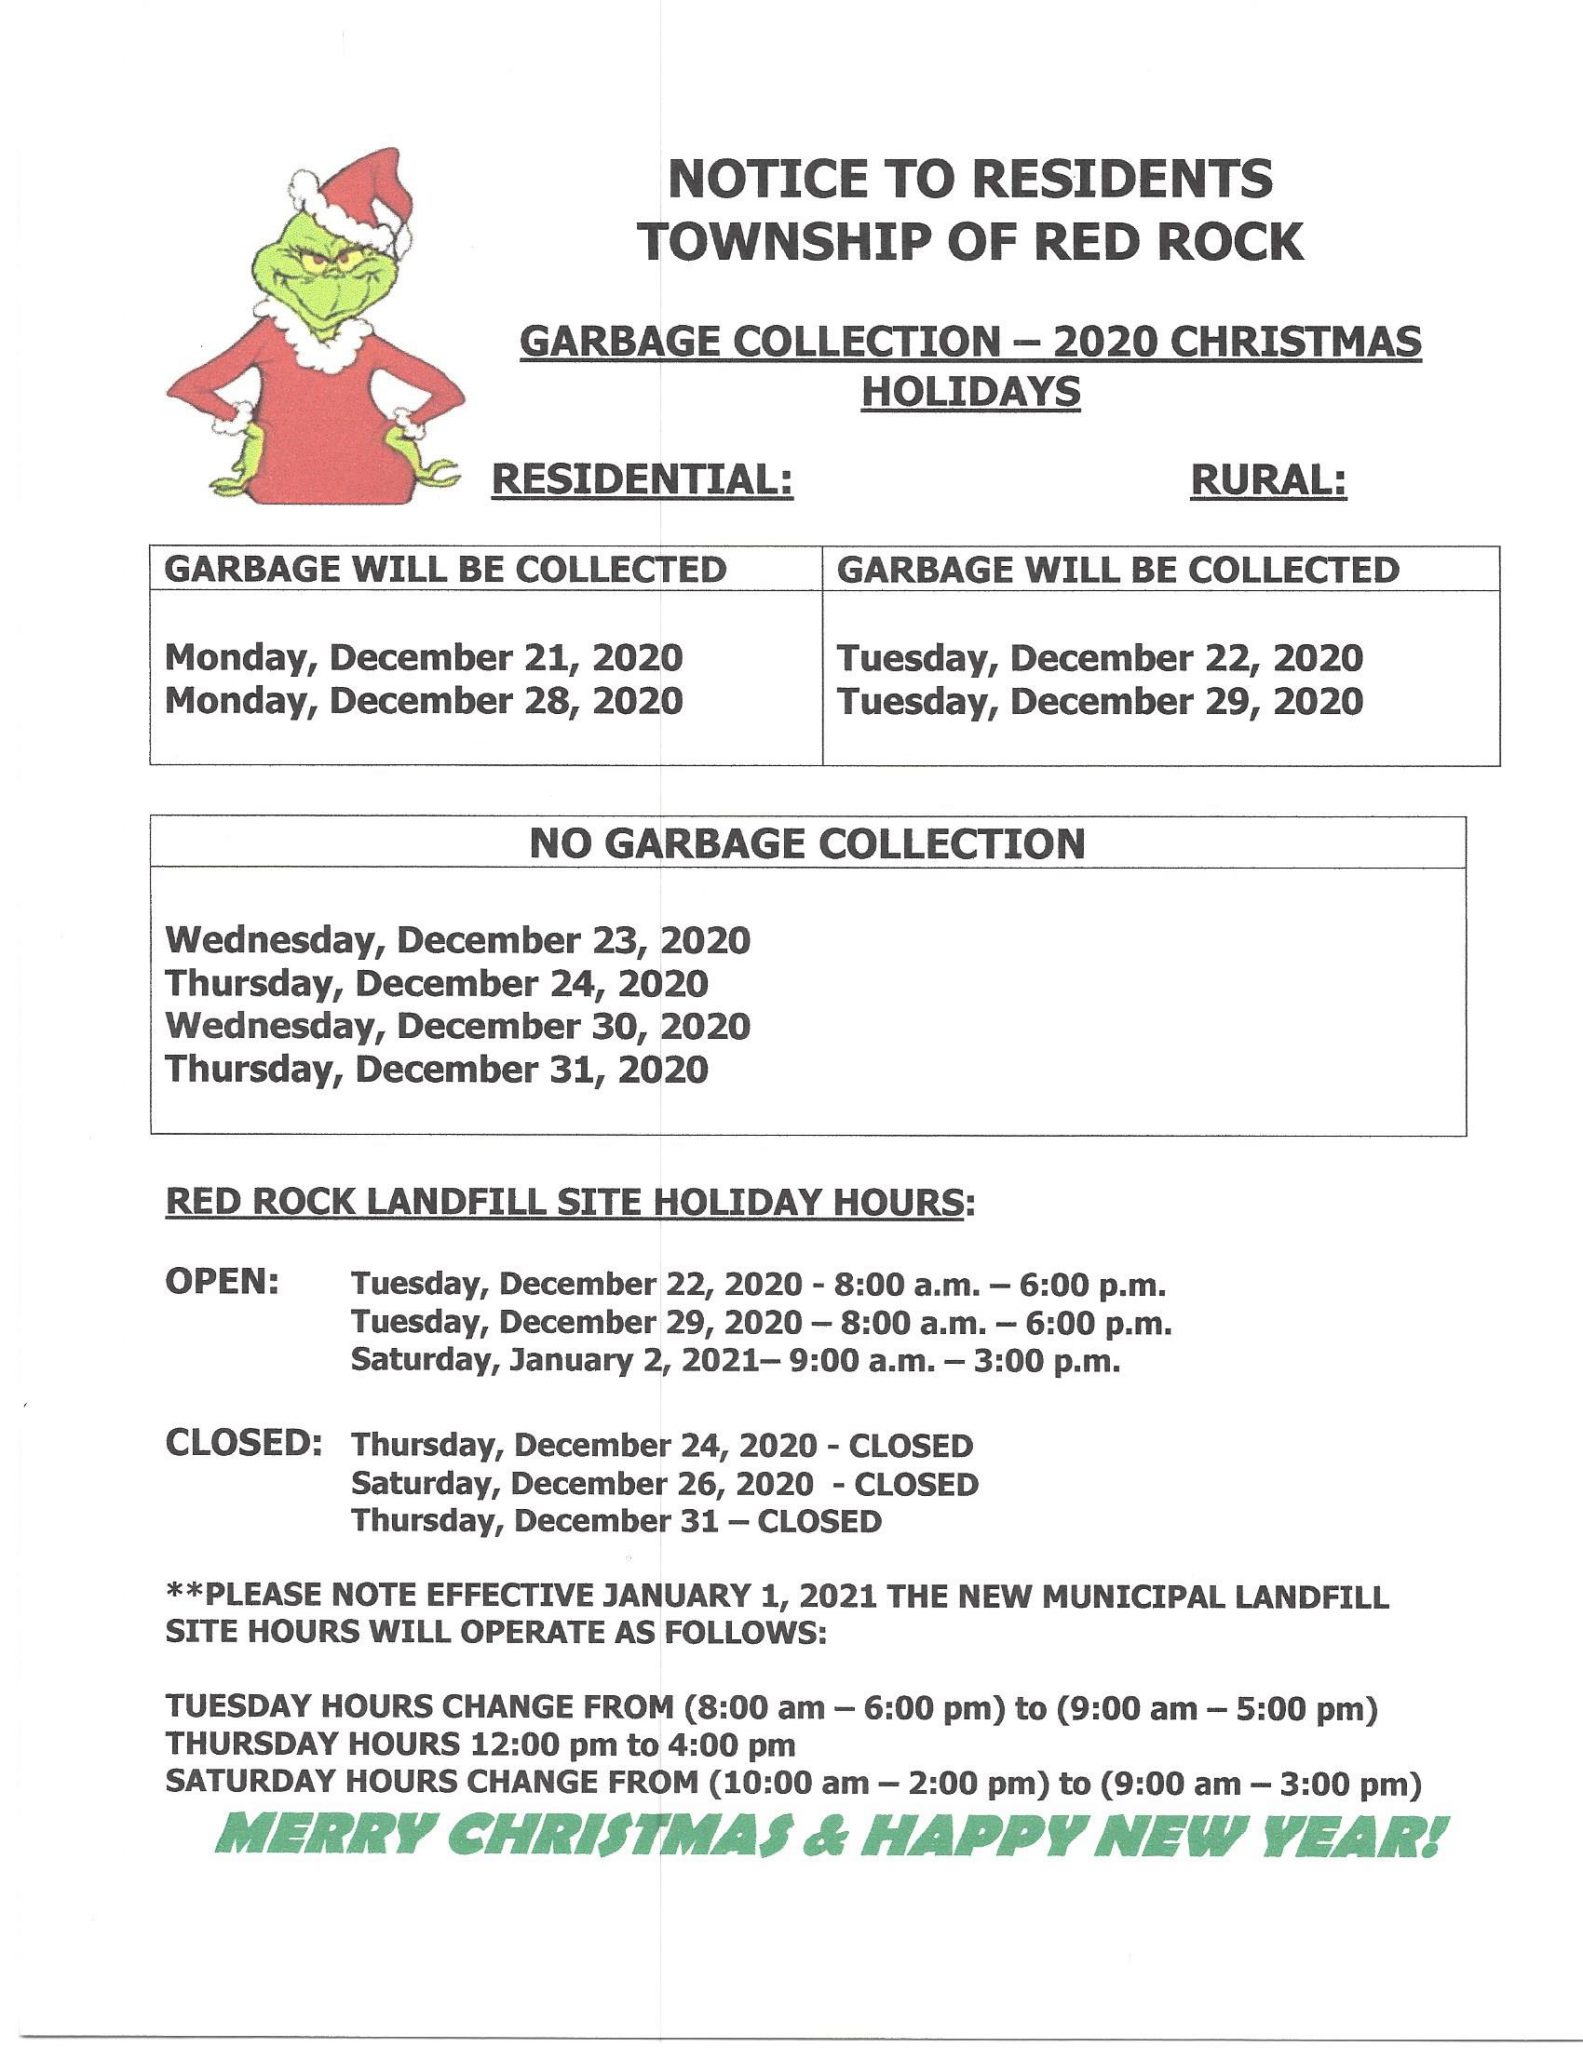 GARBAGE COLLECTION 2020 CHRISTMAS HOLIDAYS - Red Rock Township